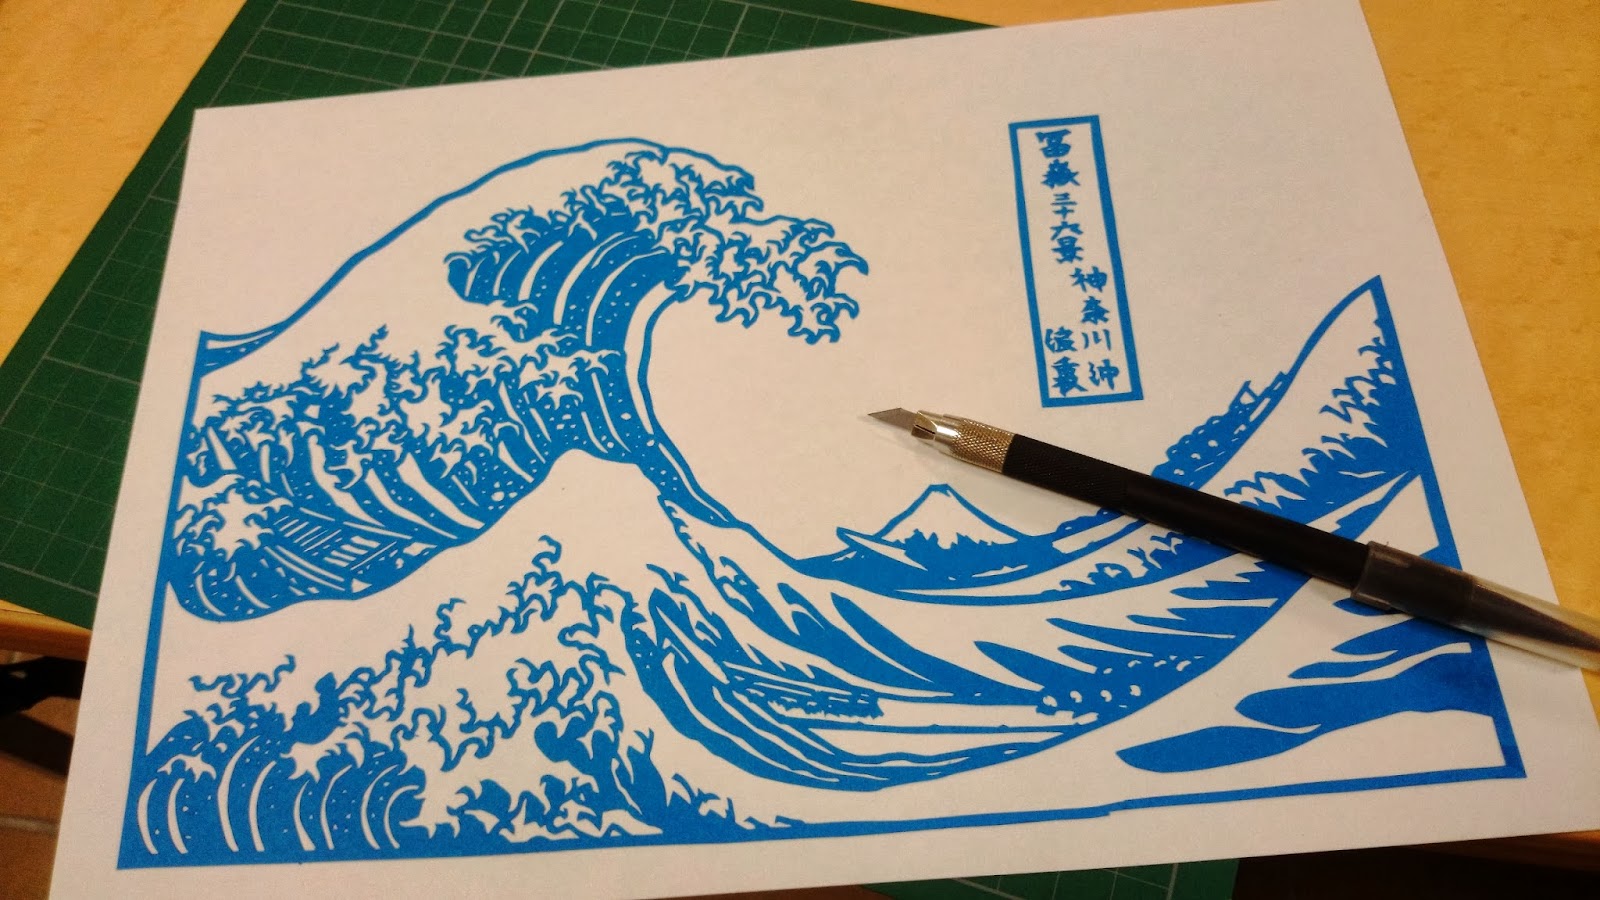 How to ART: 切り絵